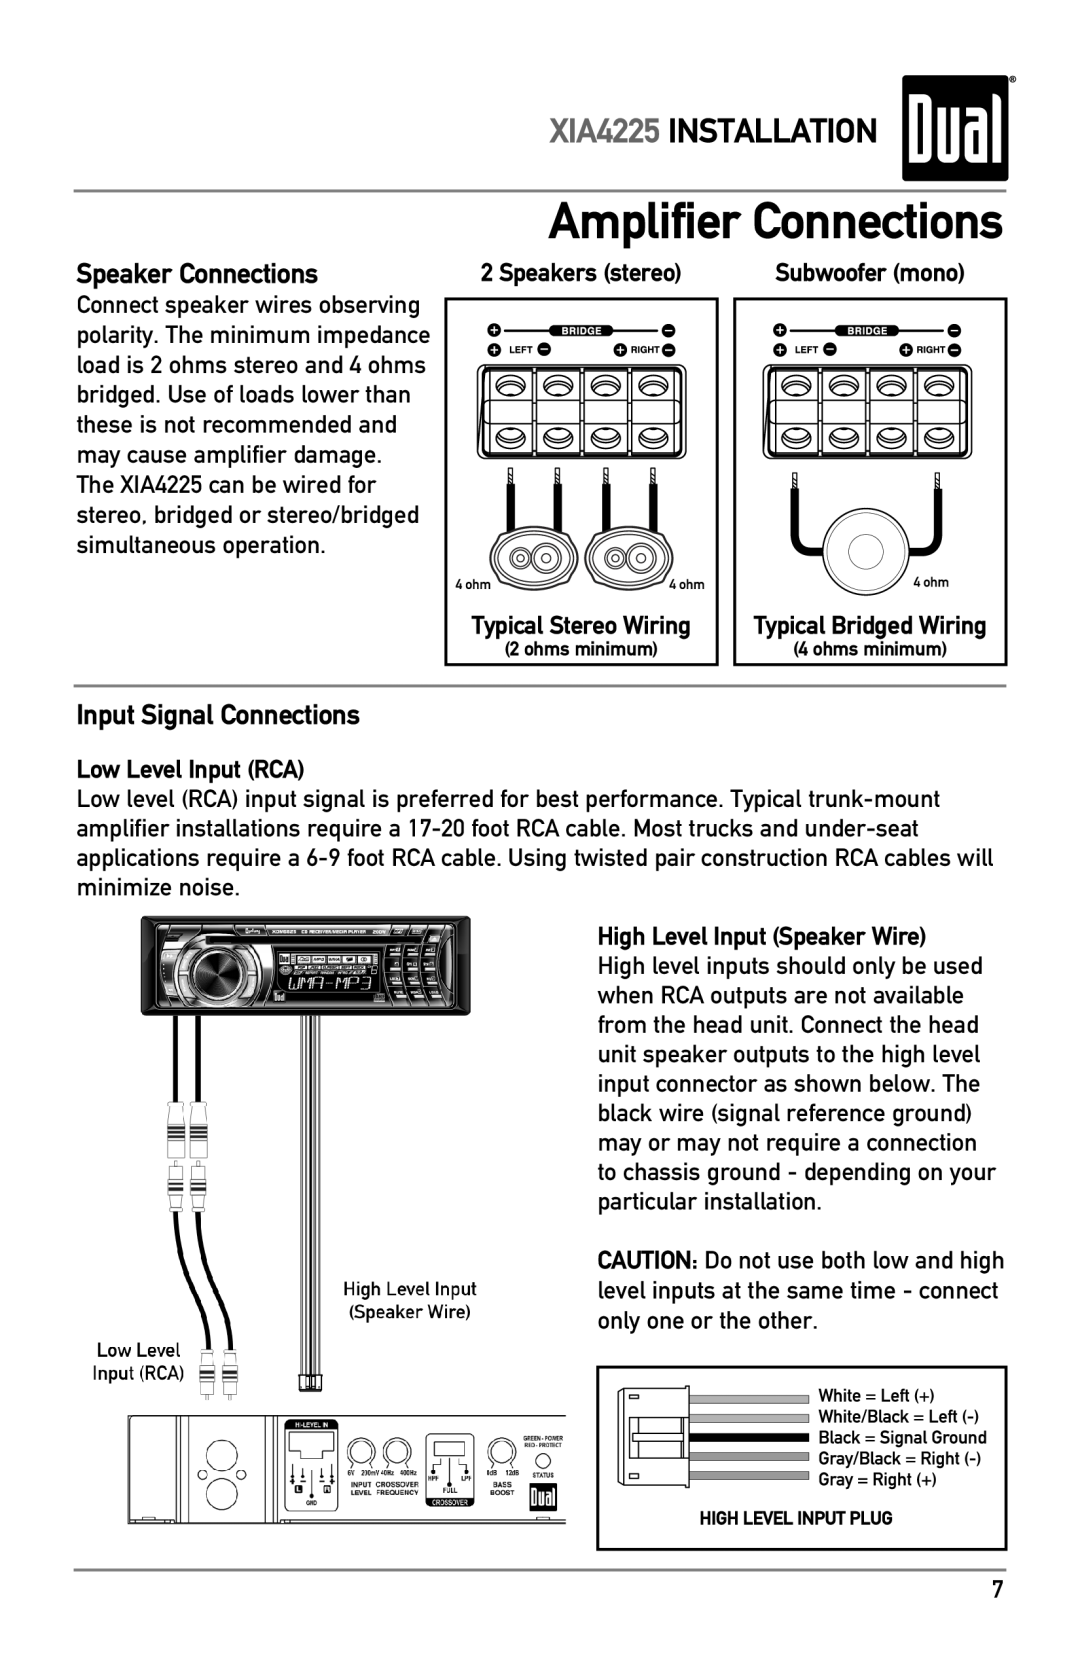 Dual owner manual Amplifier Connections, Speaker Connections, Input Signal Connections, XIA4225 INSTALLATION 